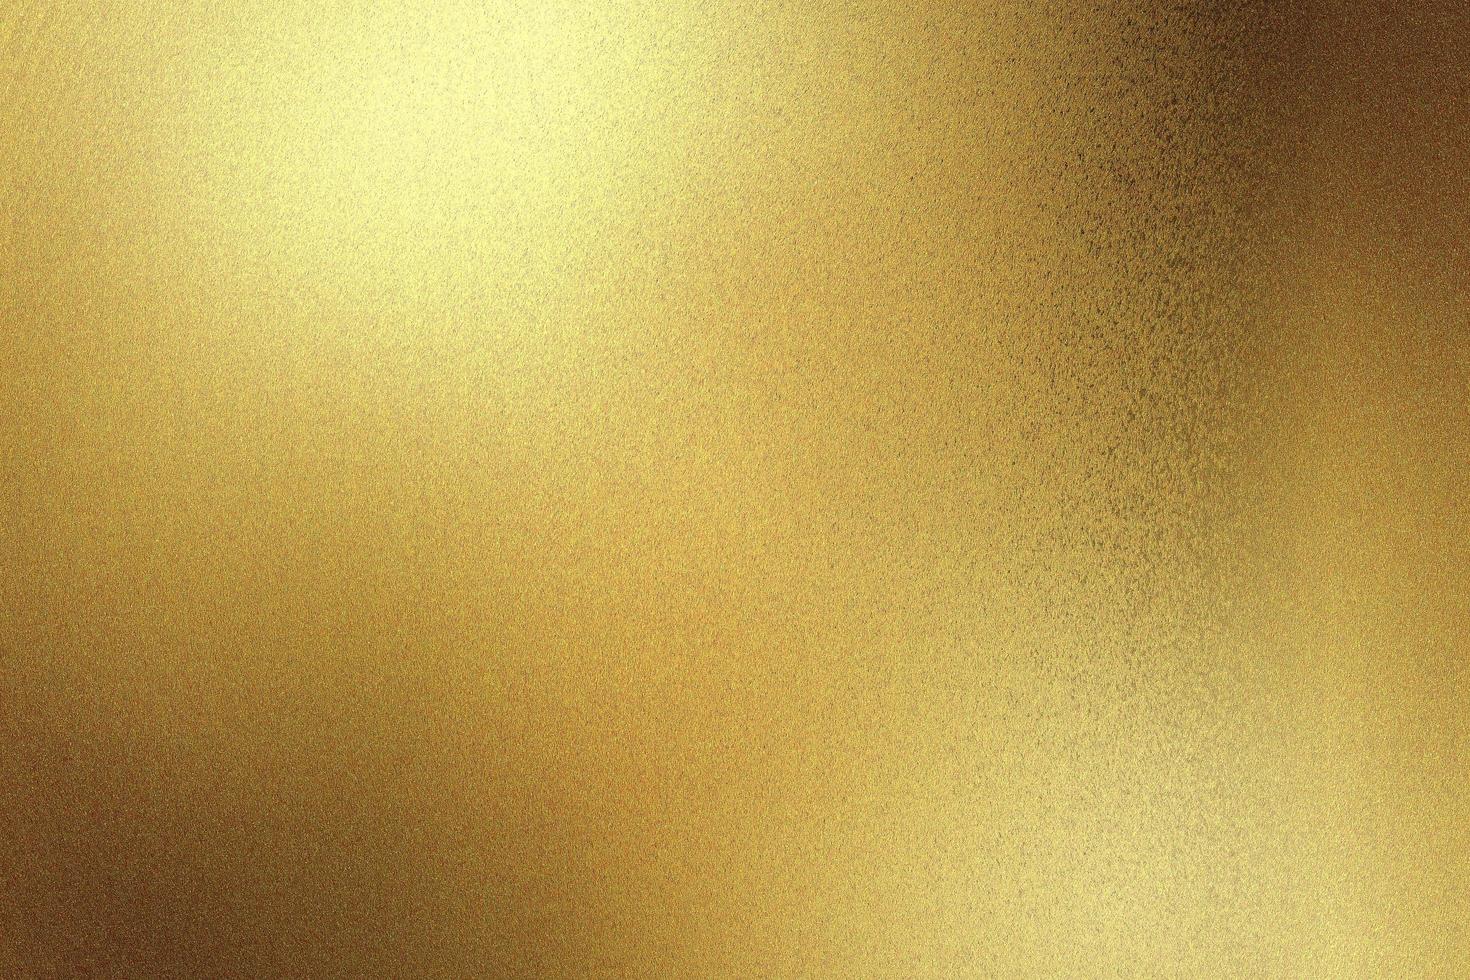 Light shining on gold painted metallic wall with copy space, abstract texture background photo